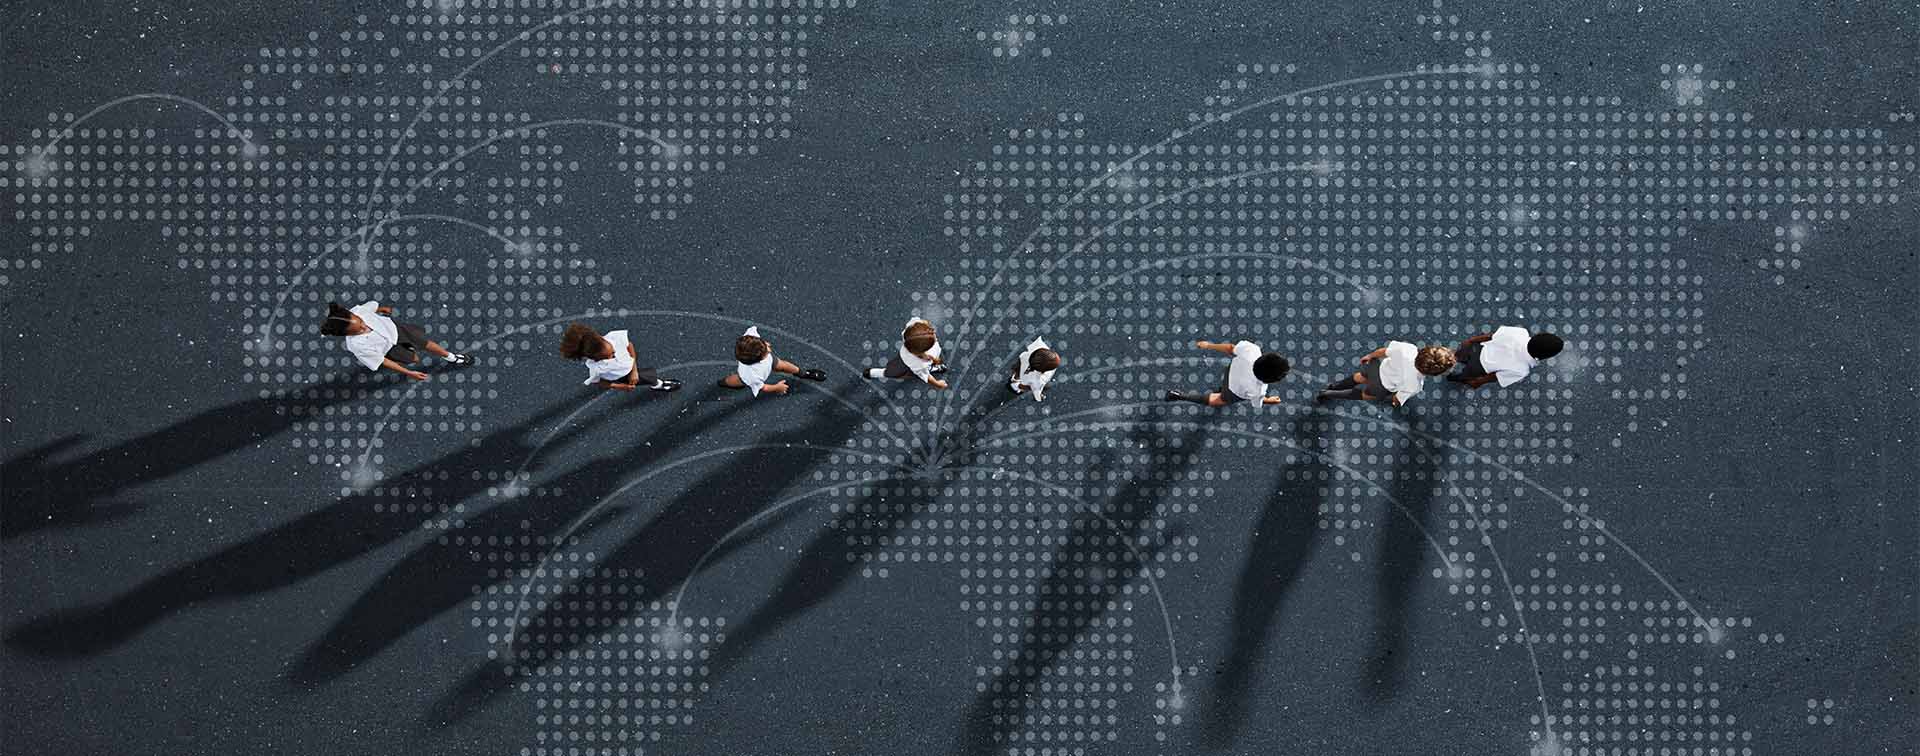 Abstract image of school children walking across a map of the world